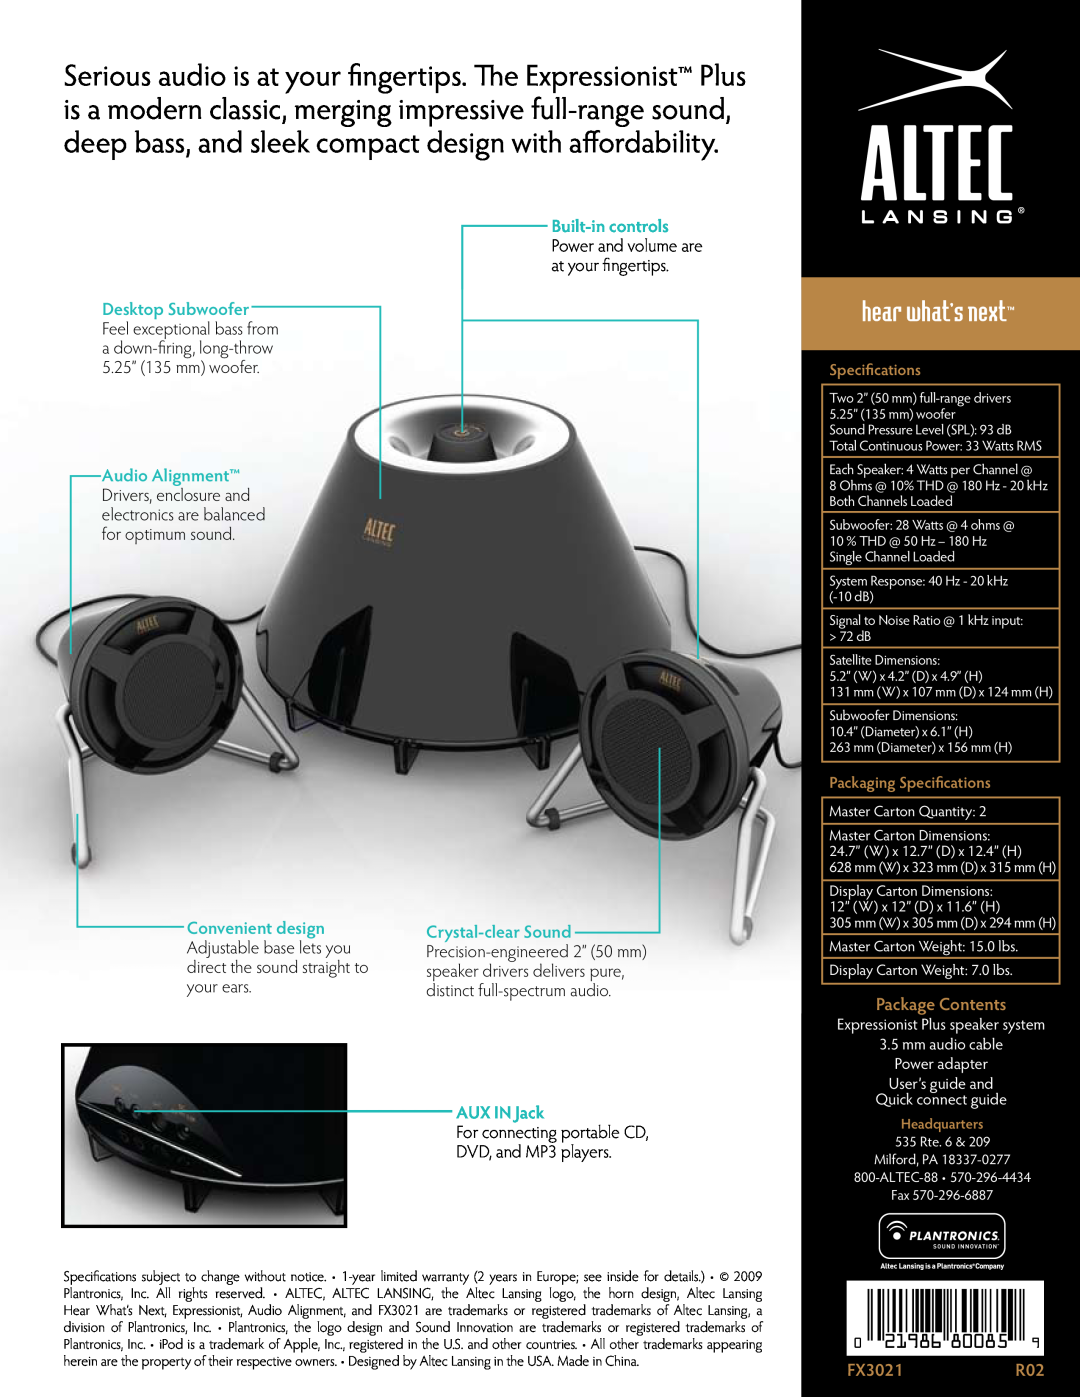 Altec Lansing manual 021986, AUX IN Jack, For connecting portable CD DVD, and MP3 players, Package Contents, FX3021R02 